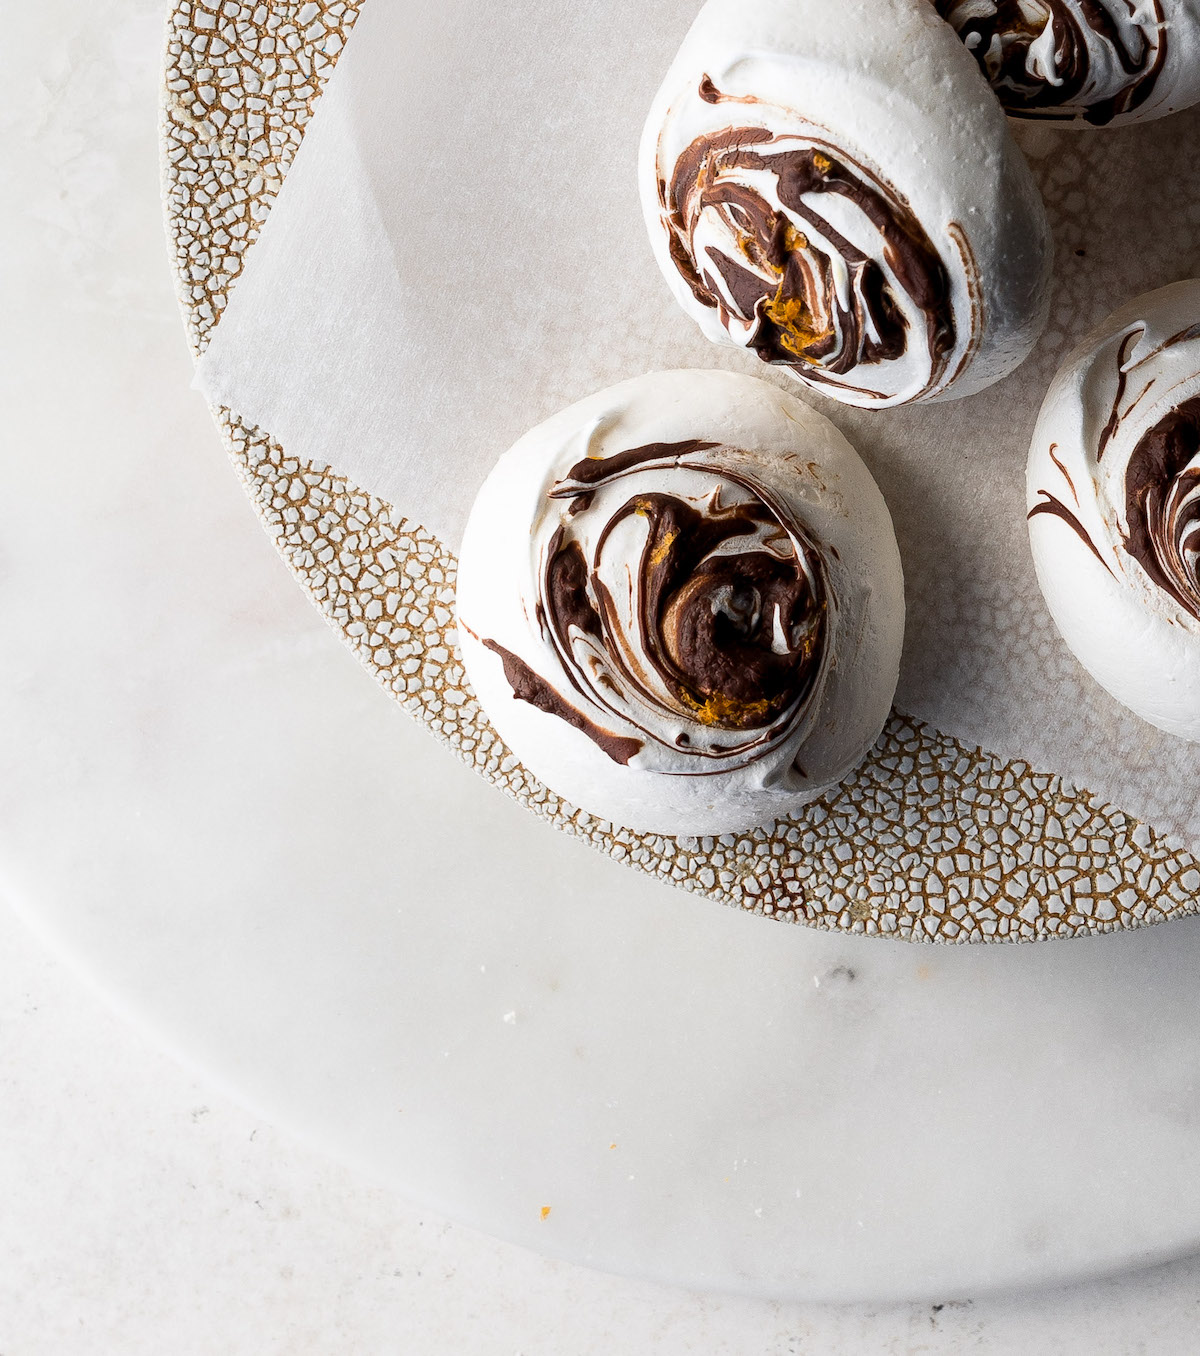 Meringue cookies with chocolate and orange zest swirls over the tops on a platter.